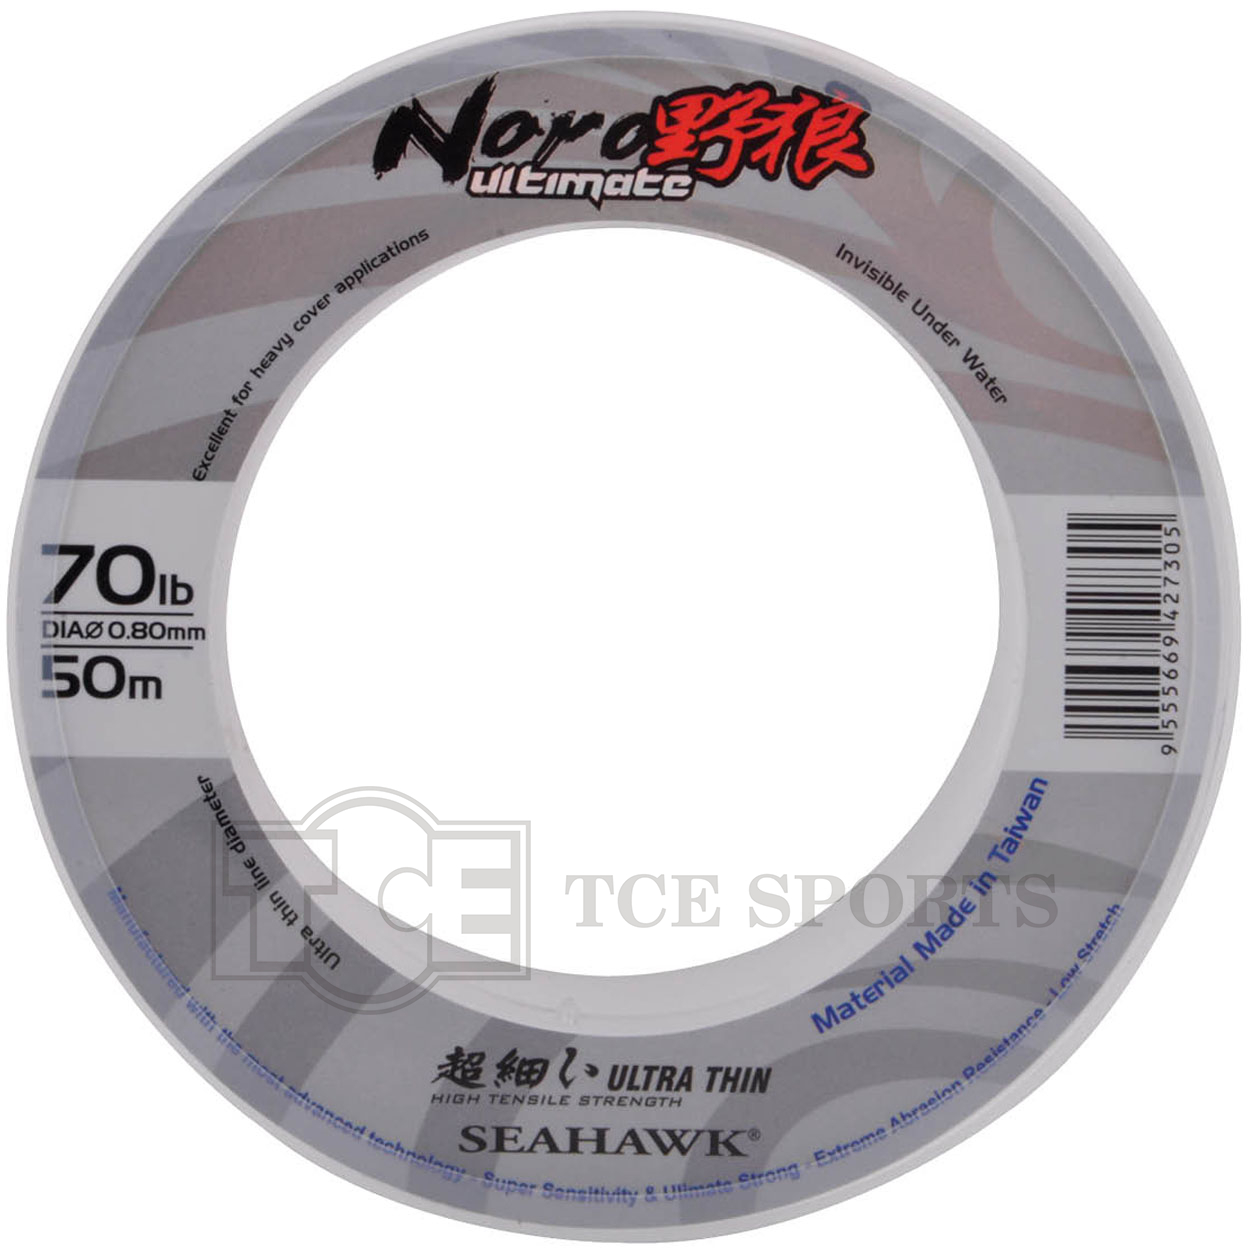 Seahawk - Noro Ultimate - NUT 1a